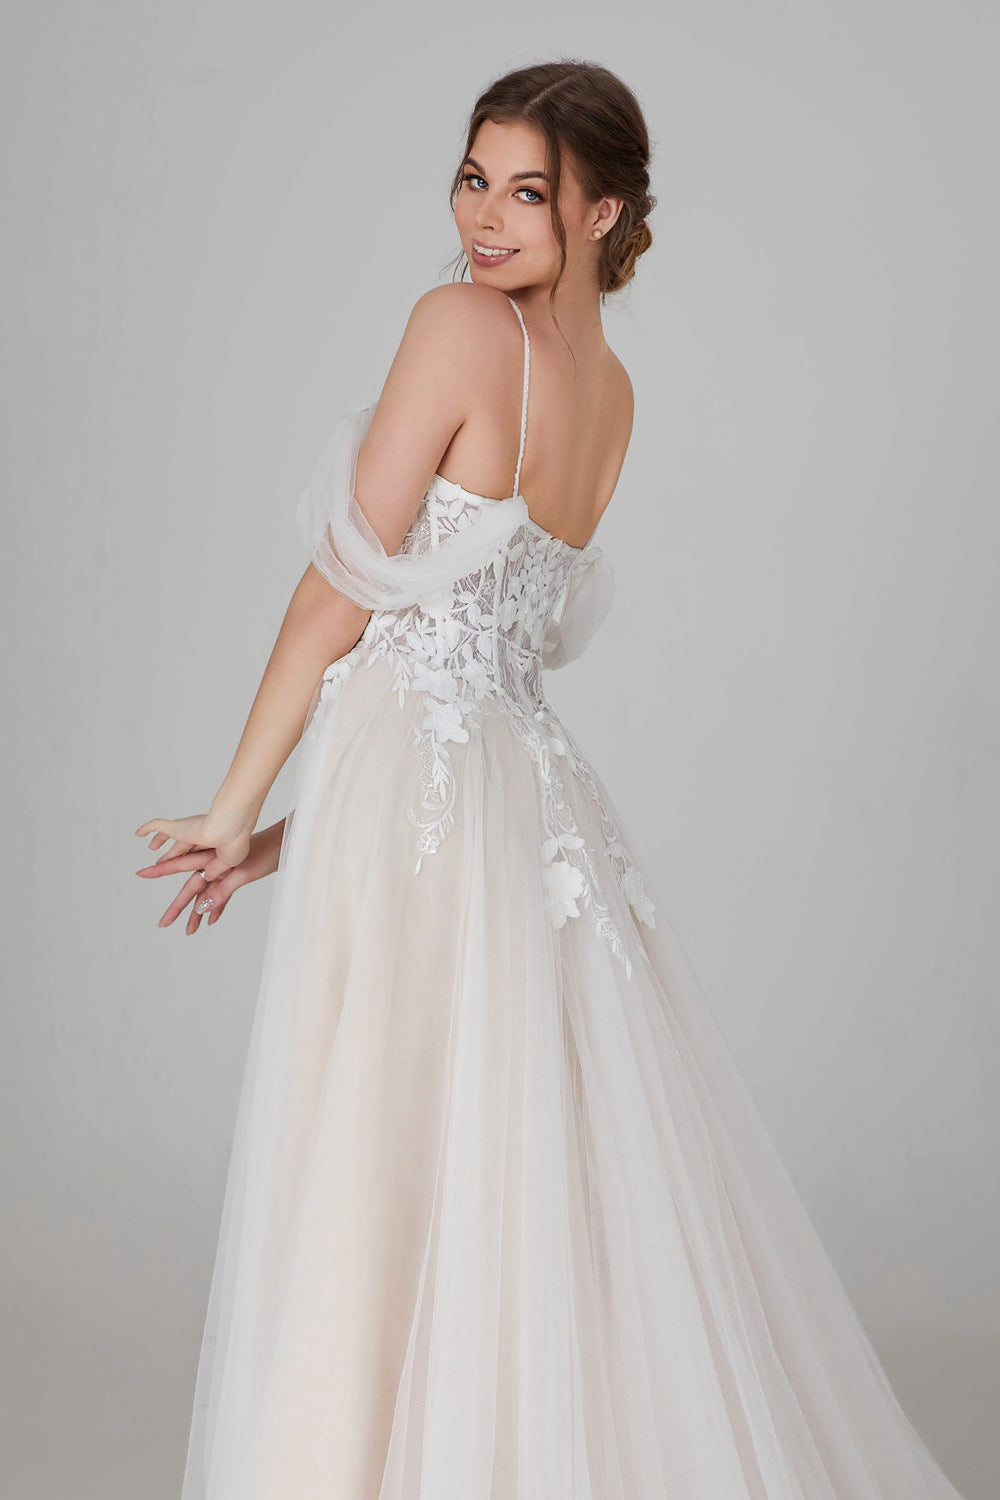 Wholesale Delight The Glamorous Wedding Prom Gown 3303